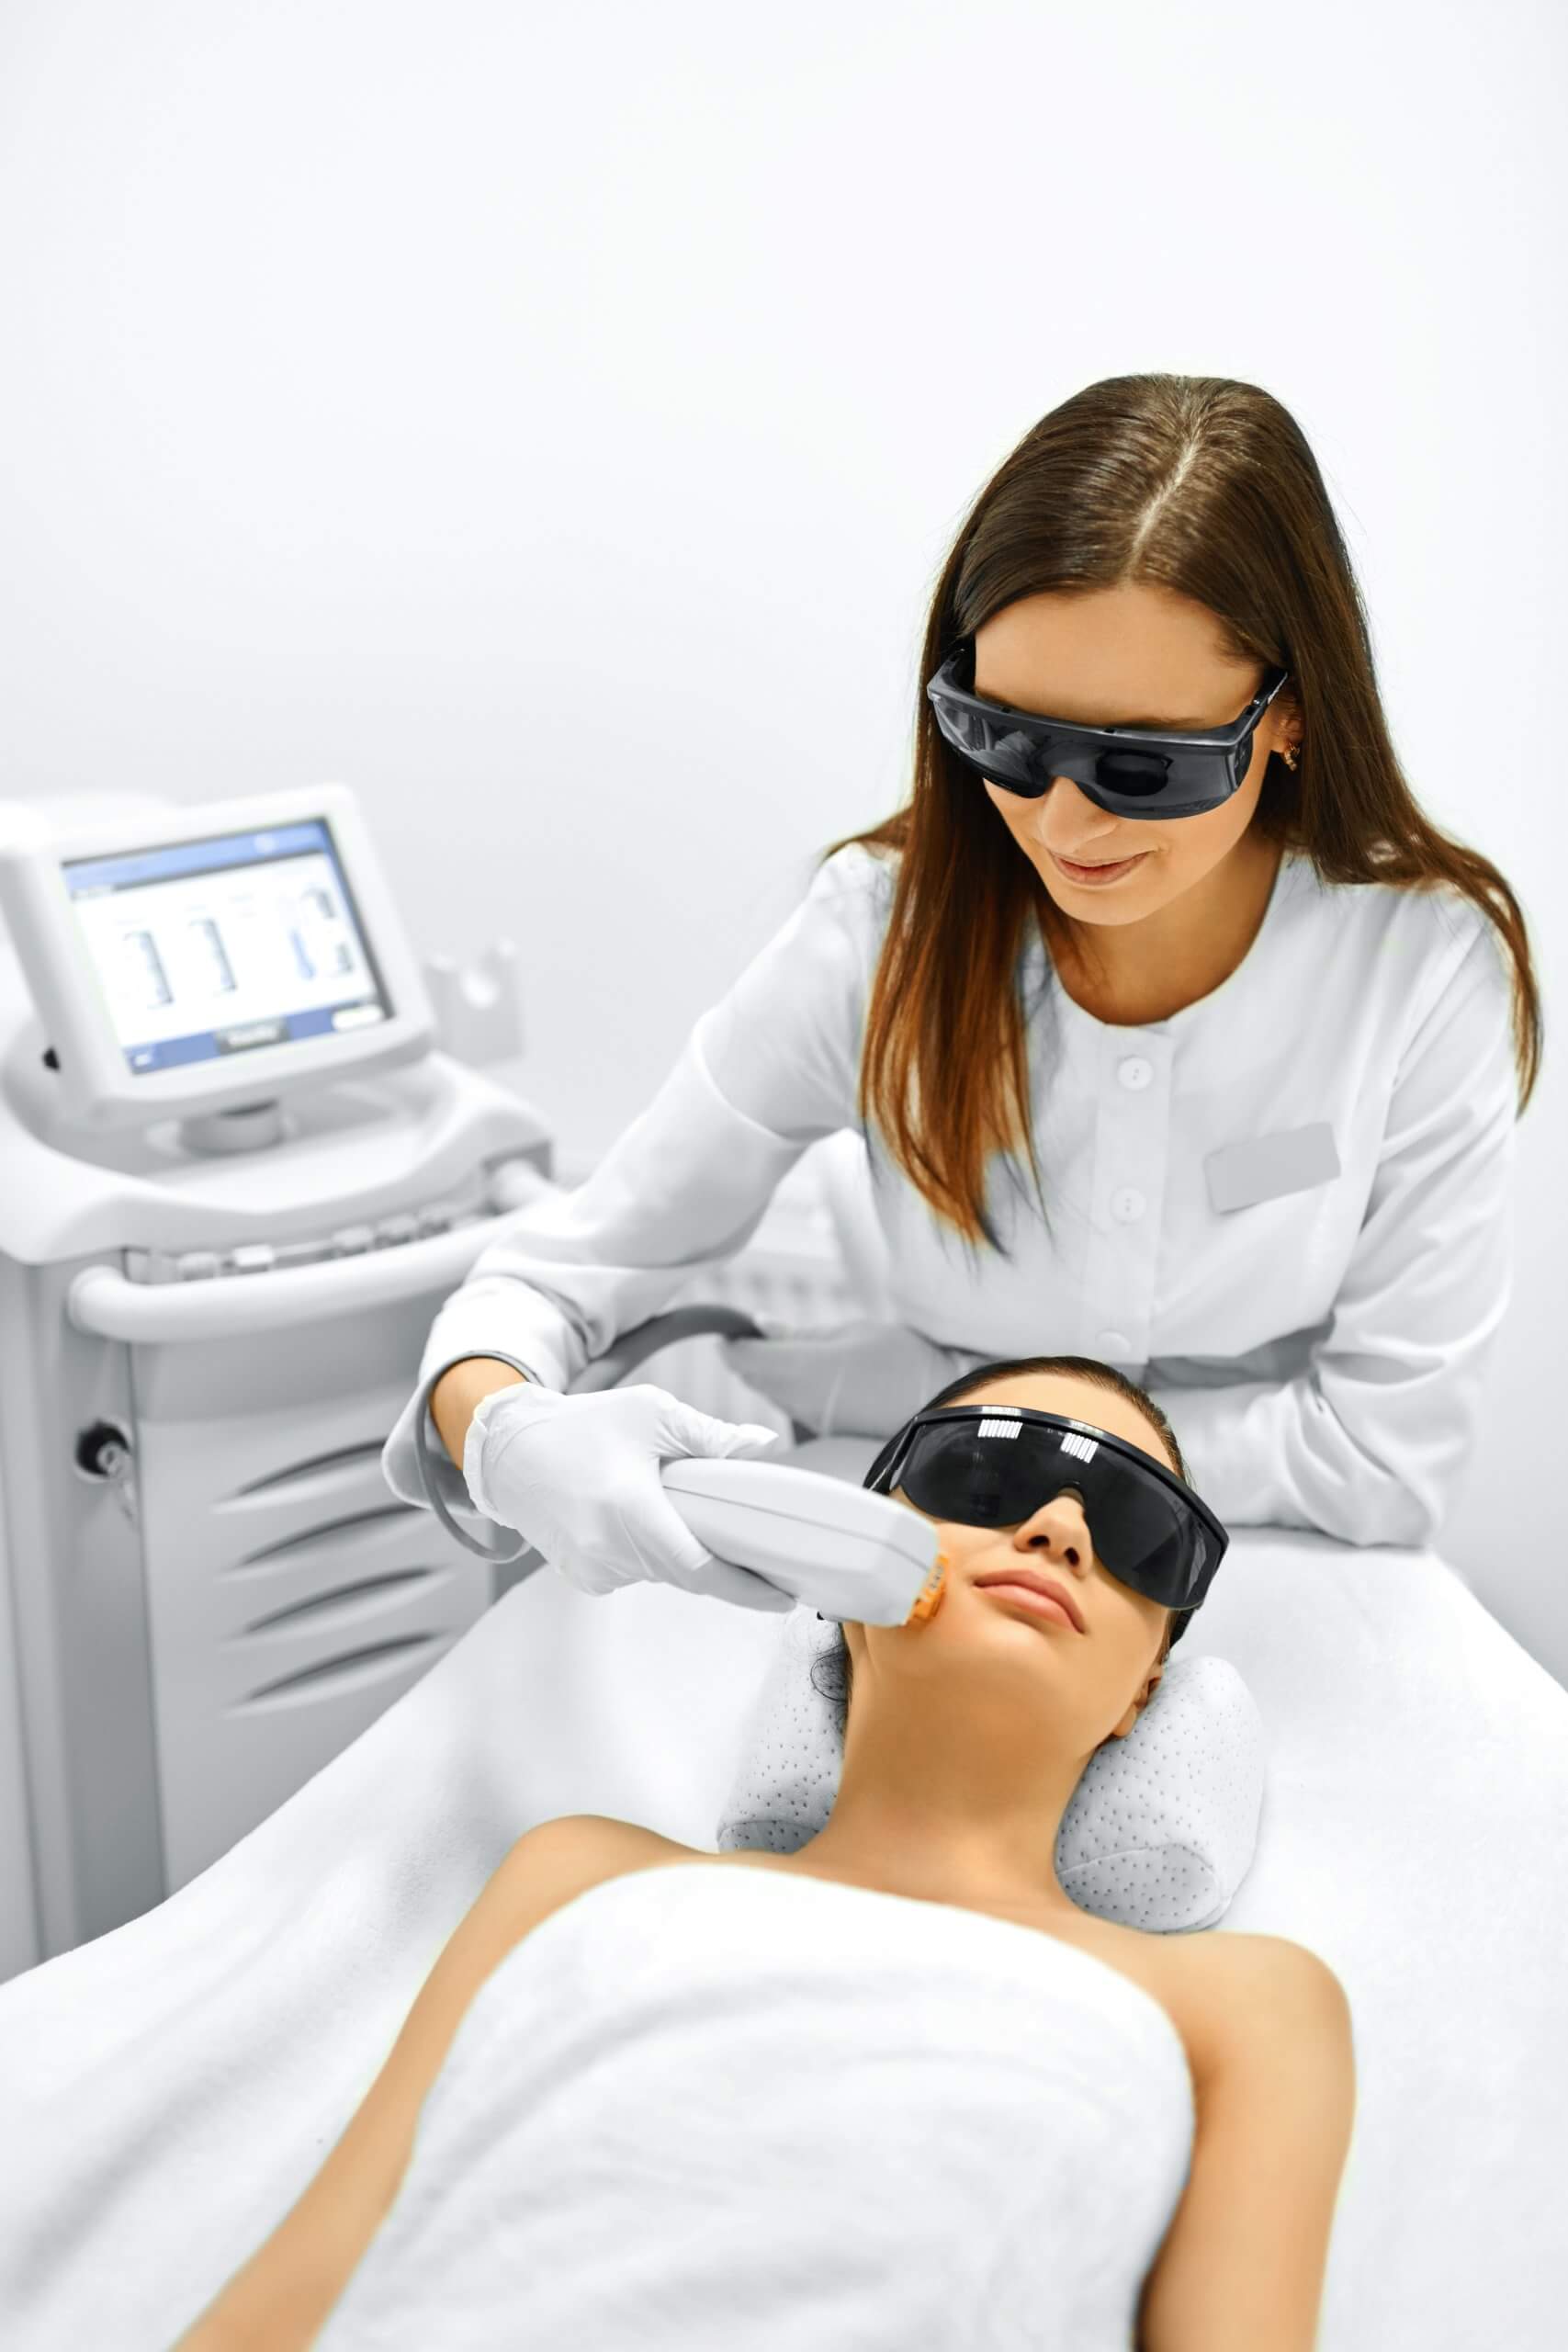 woman who has taken aesthetic laser training is completing a treatment on a client